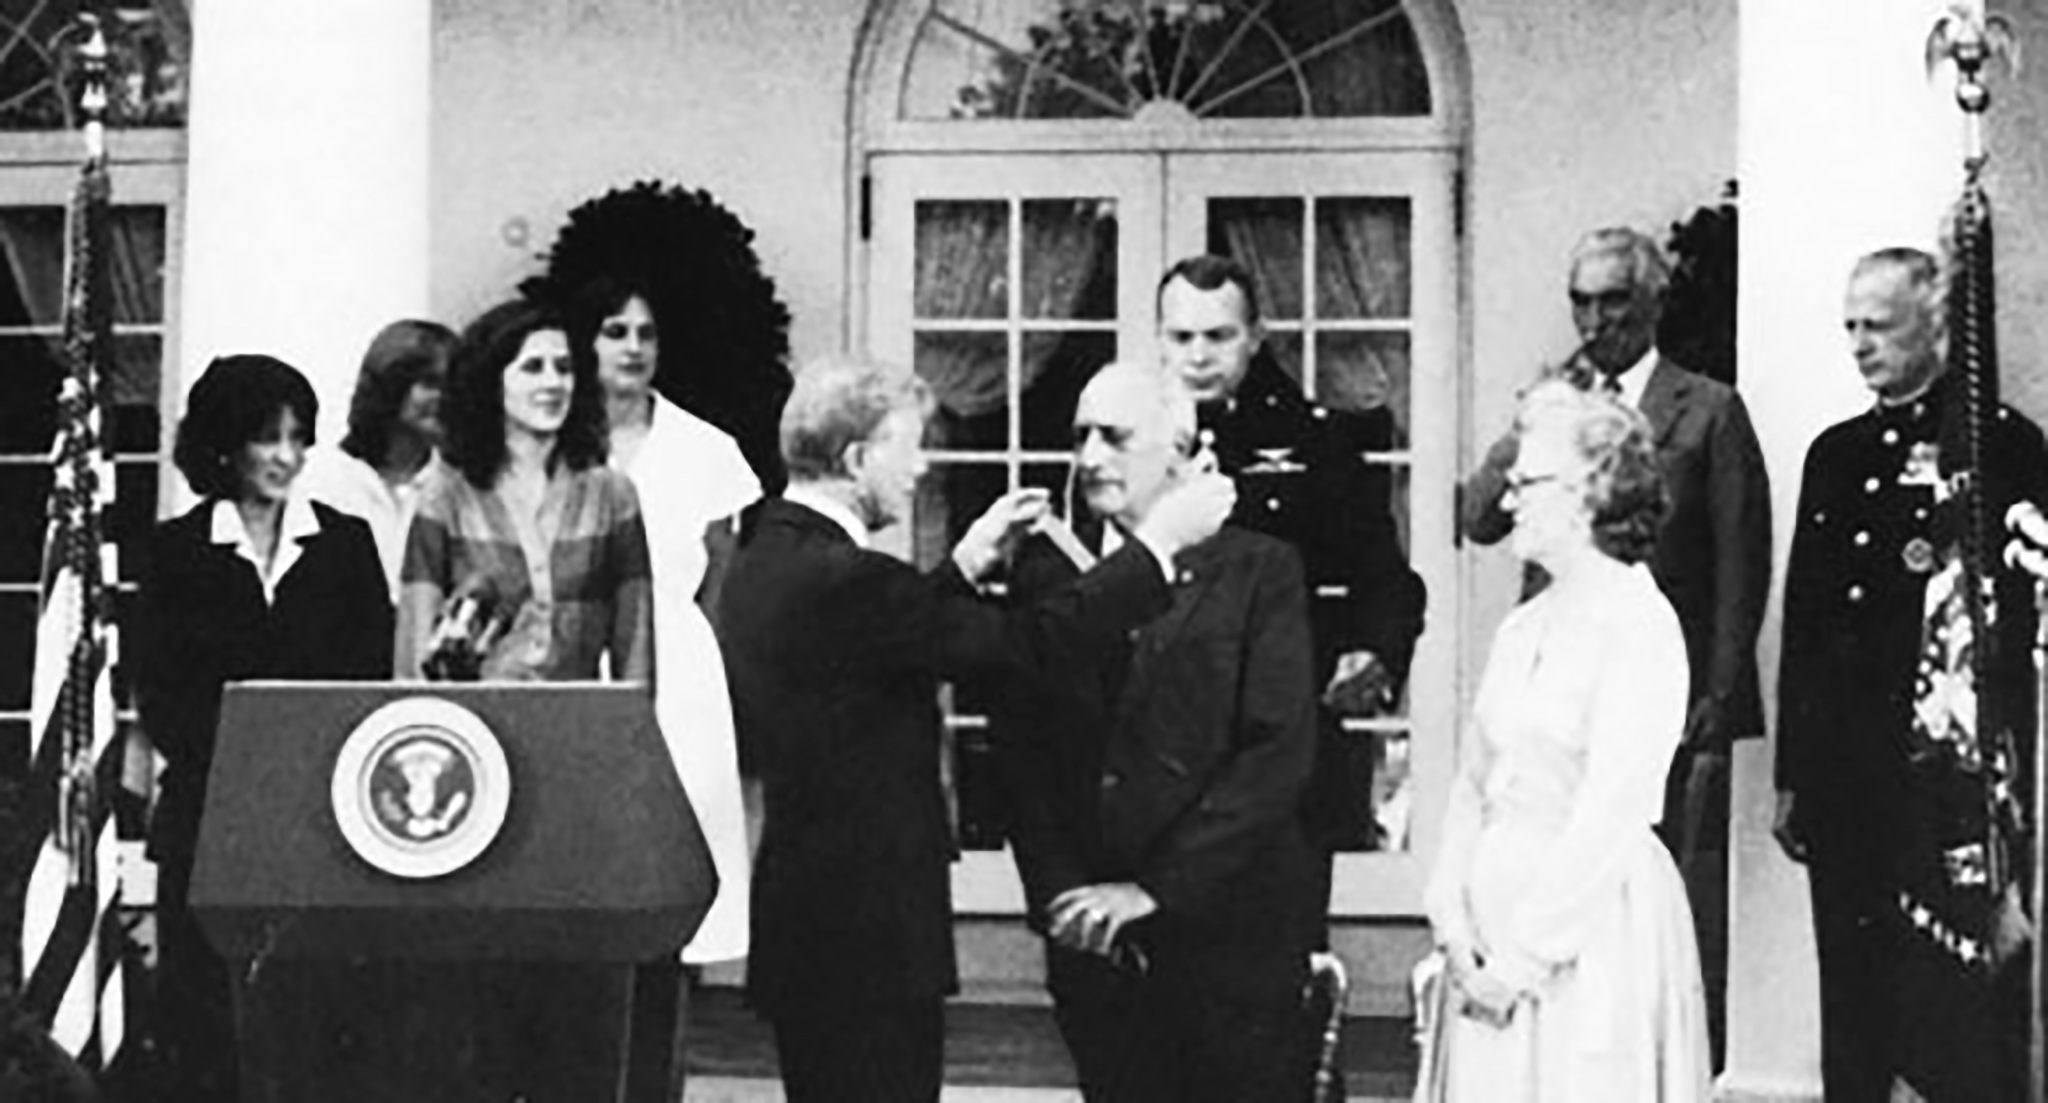 President Jimmy Carter presenting Corporal Anthony Casamento with his long-overdue Medal of Honor at the White House in 1980. (Credit: National Archives)